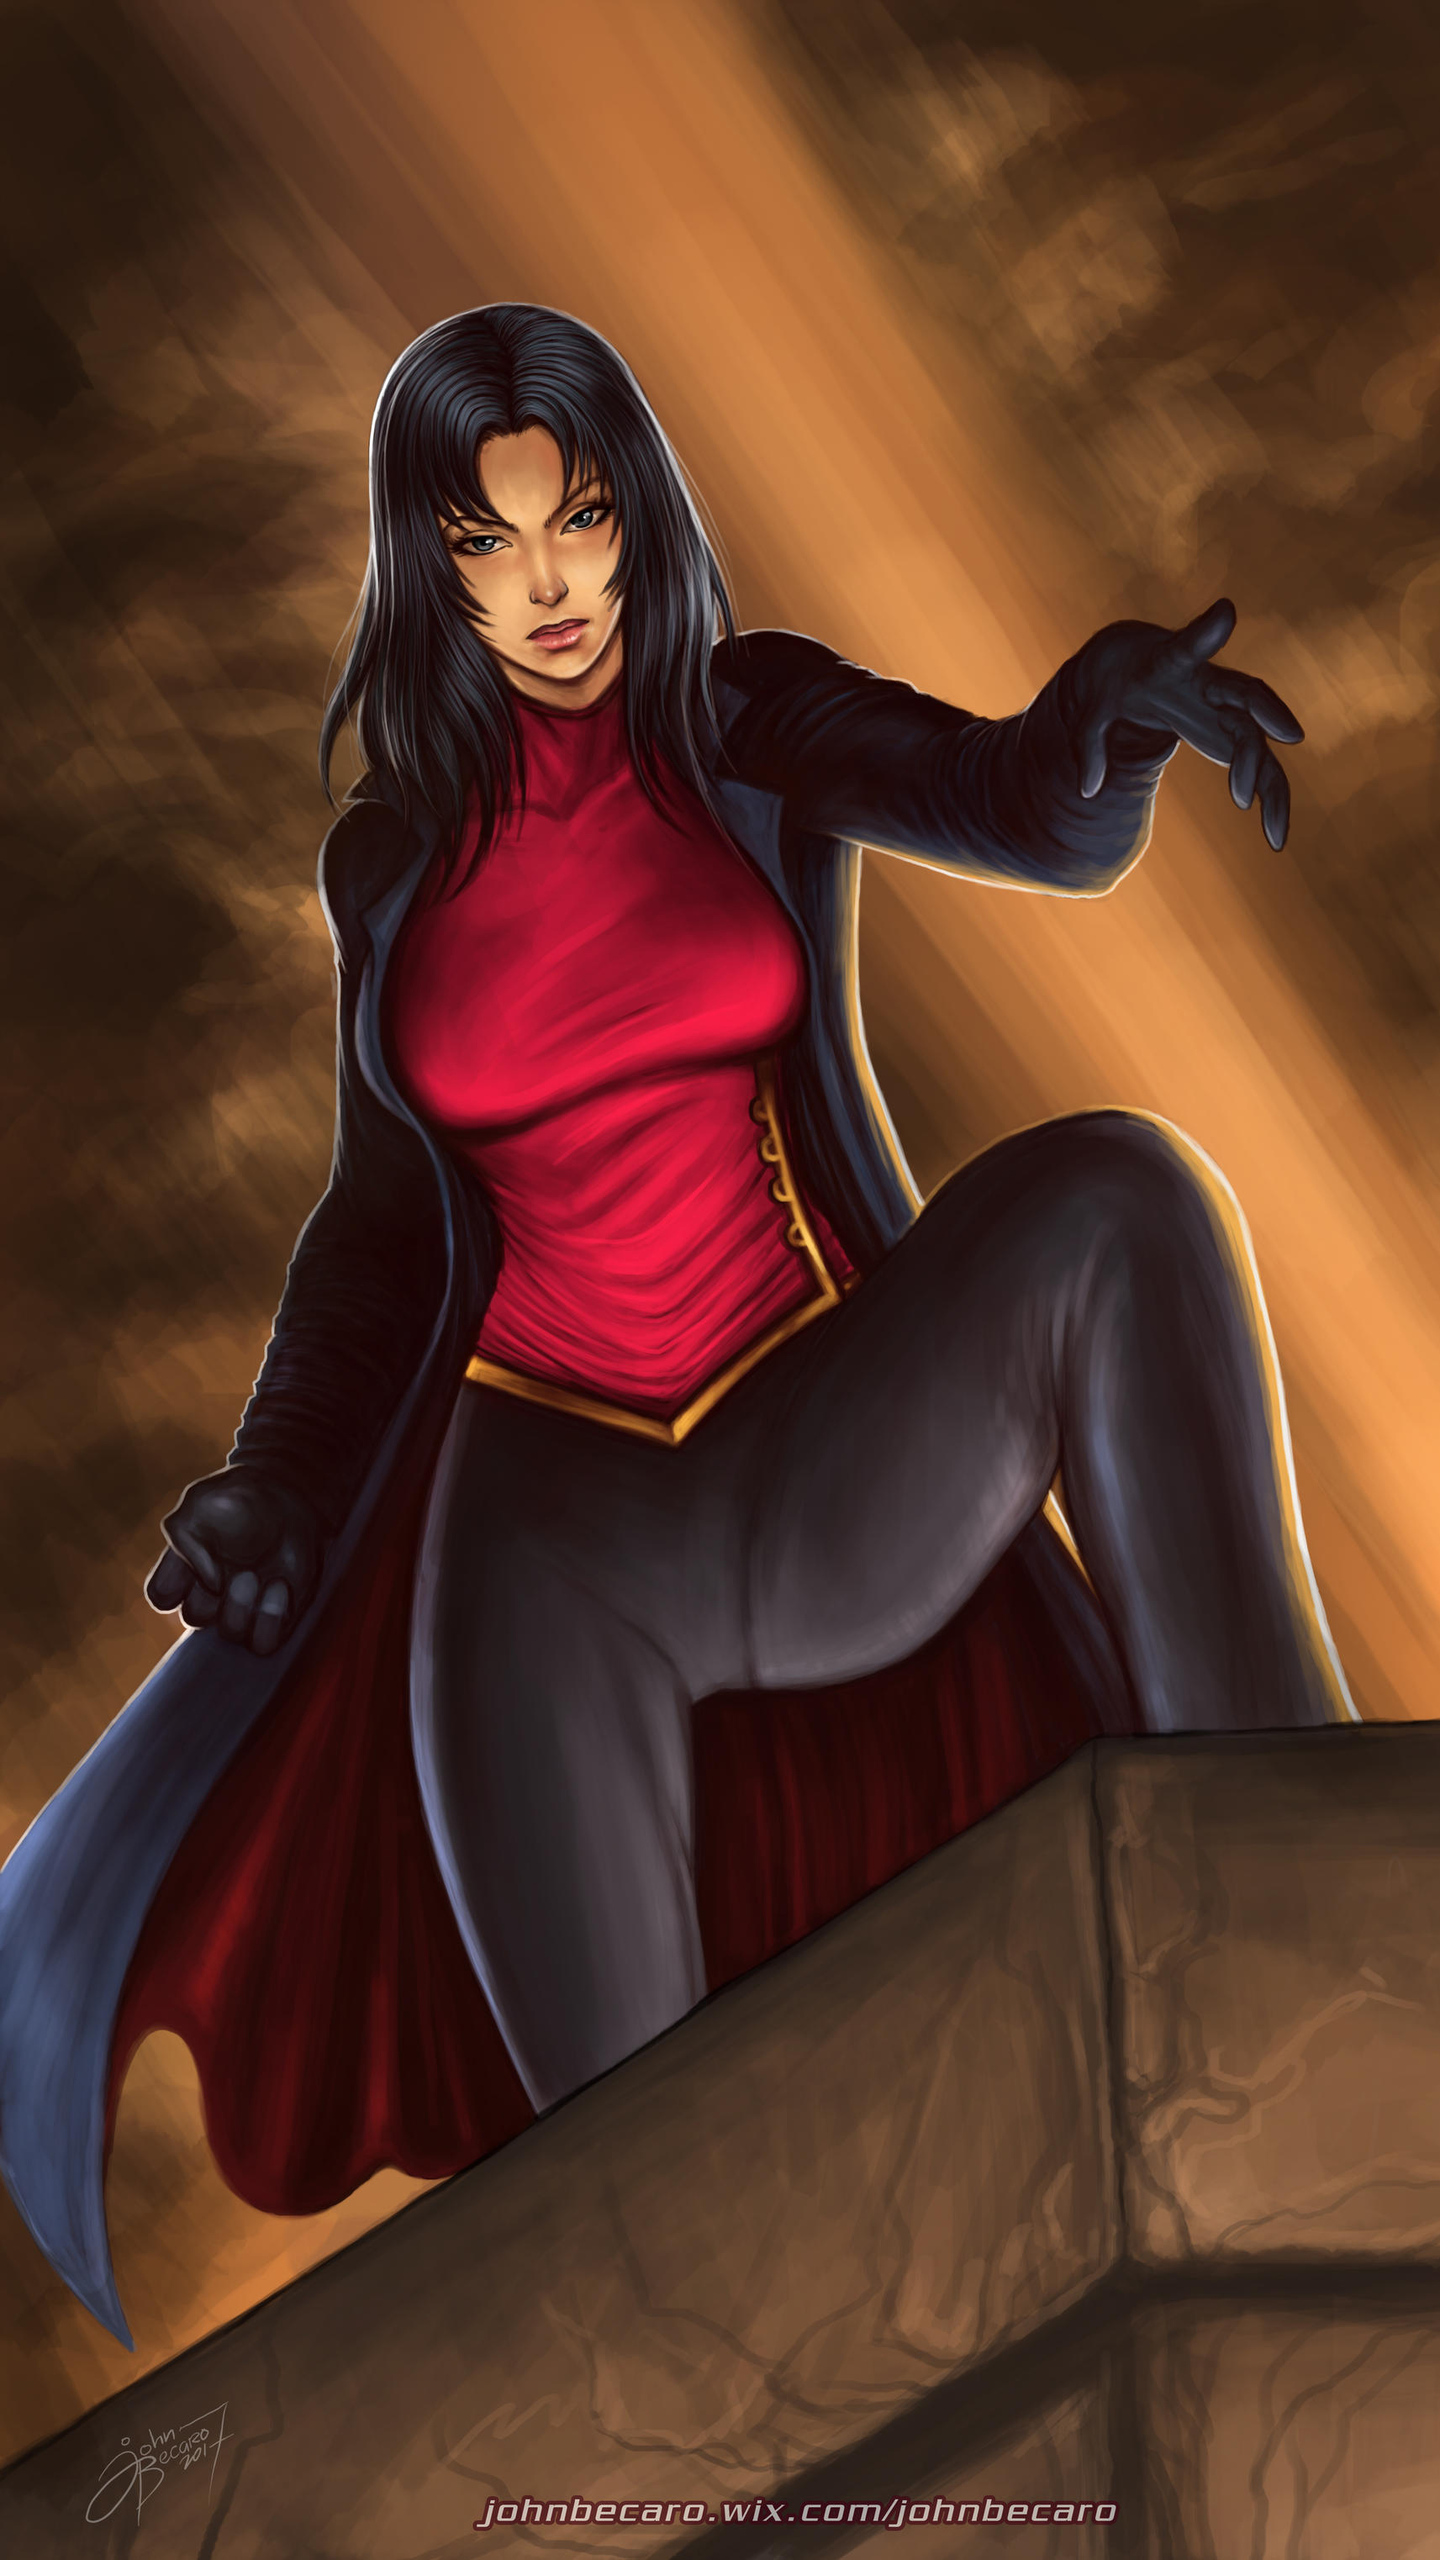 1440x2560 Lady Shiva Art Samsung Galaxy S6,S7 ,Google Pixel XL ,Nexus 6,6P  ,LG G5 HD 4k Wallpapers, Images, Backgrounds, Photos and Pictures